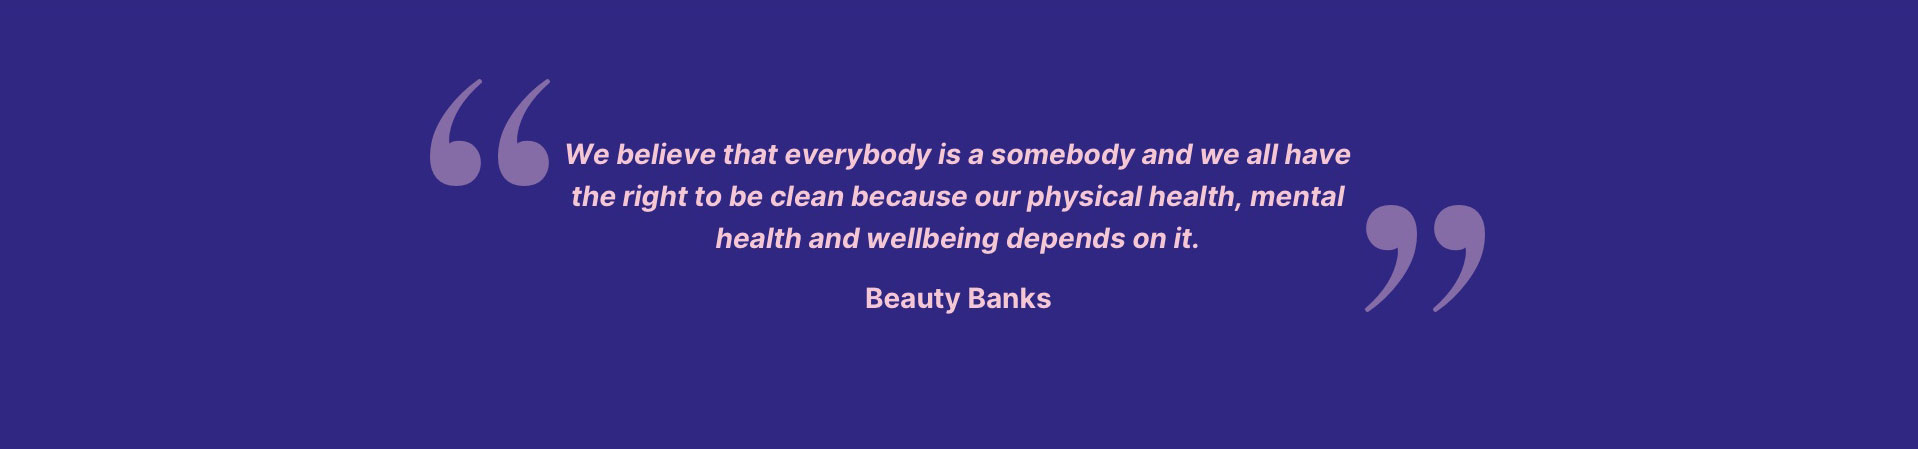 We believe that everbody is a somebody and we all have the right to be clean because our physical health, mental health and wellbeing depends on it.